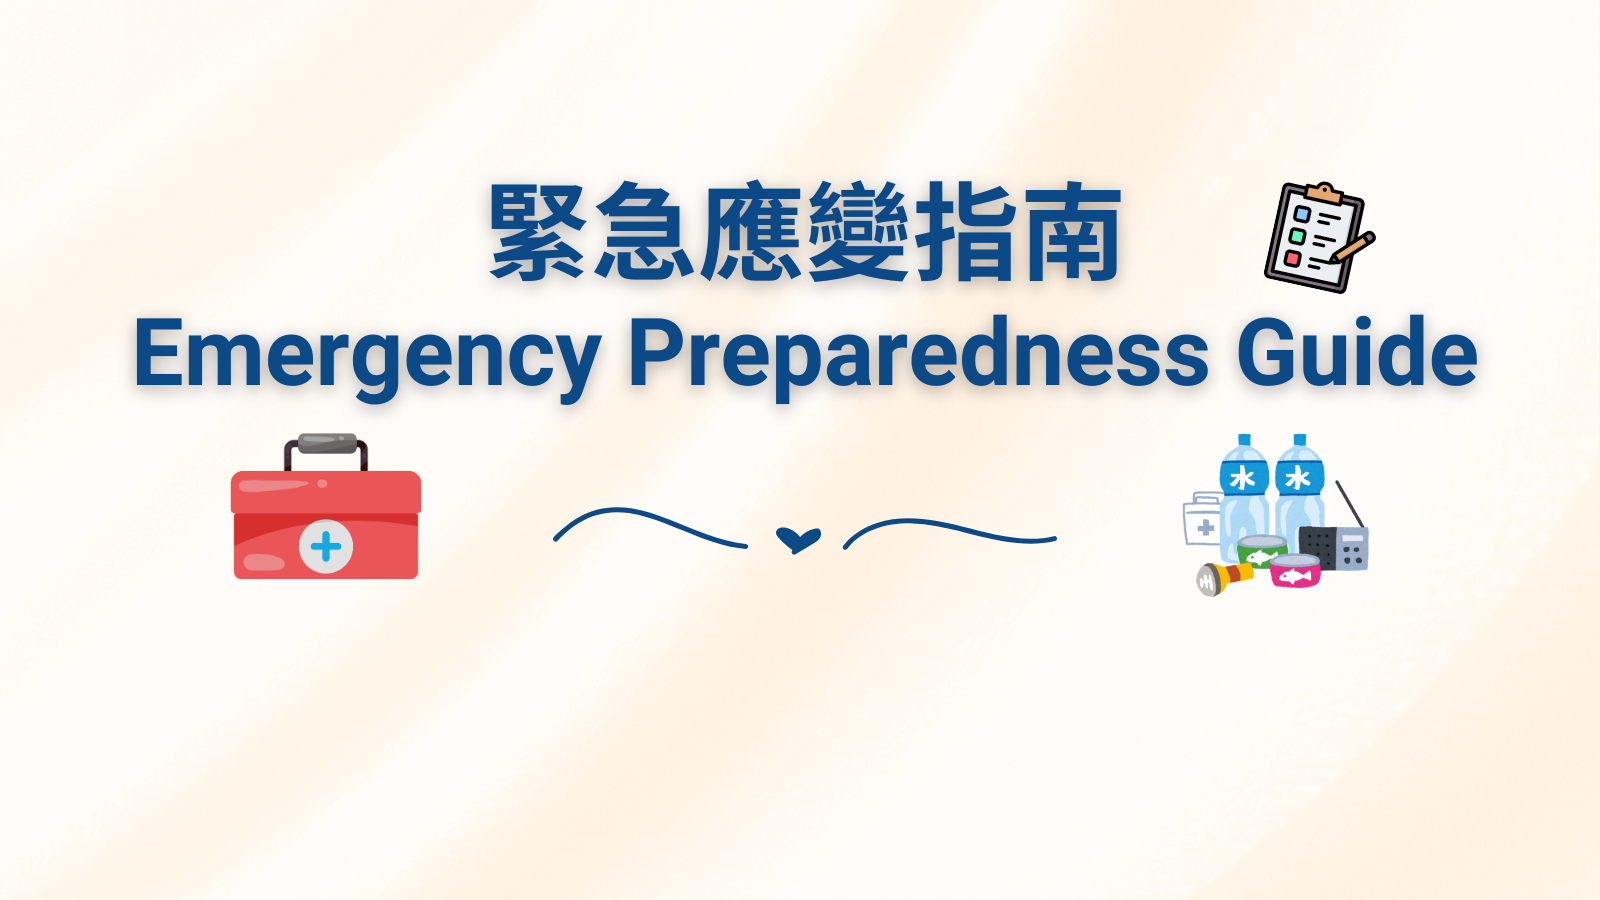 Stay Ready, Stay Safe: Emergency Preparedness Tips and Resources